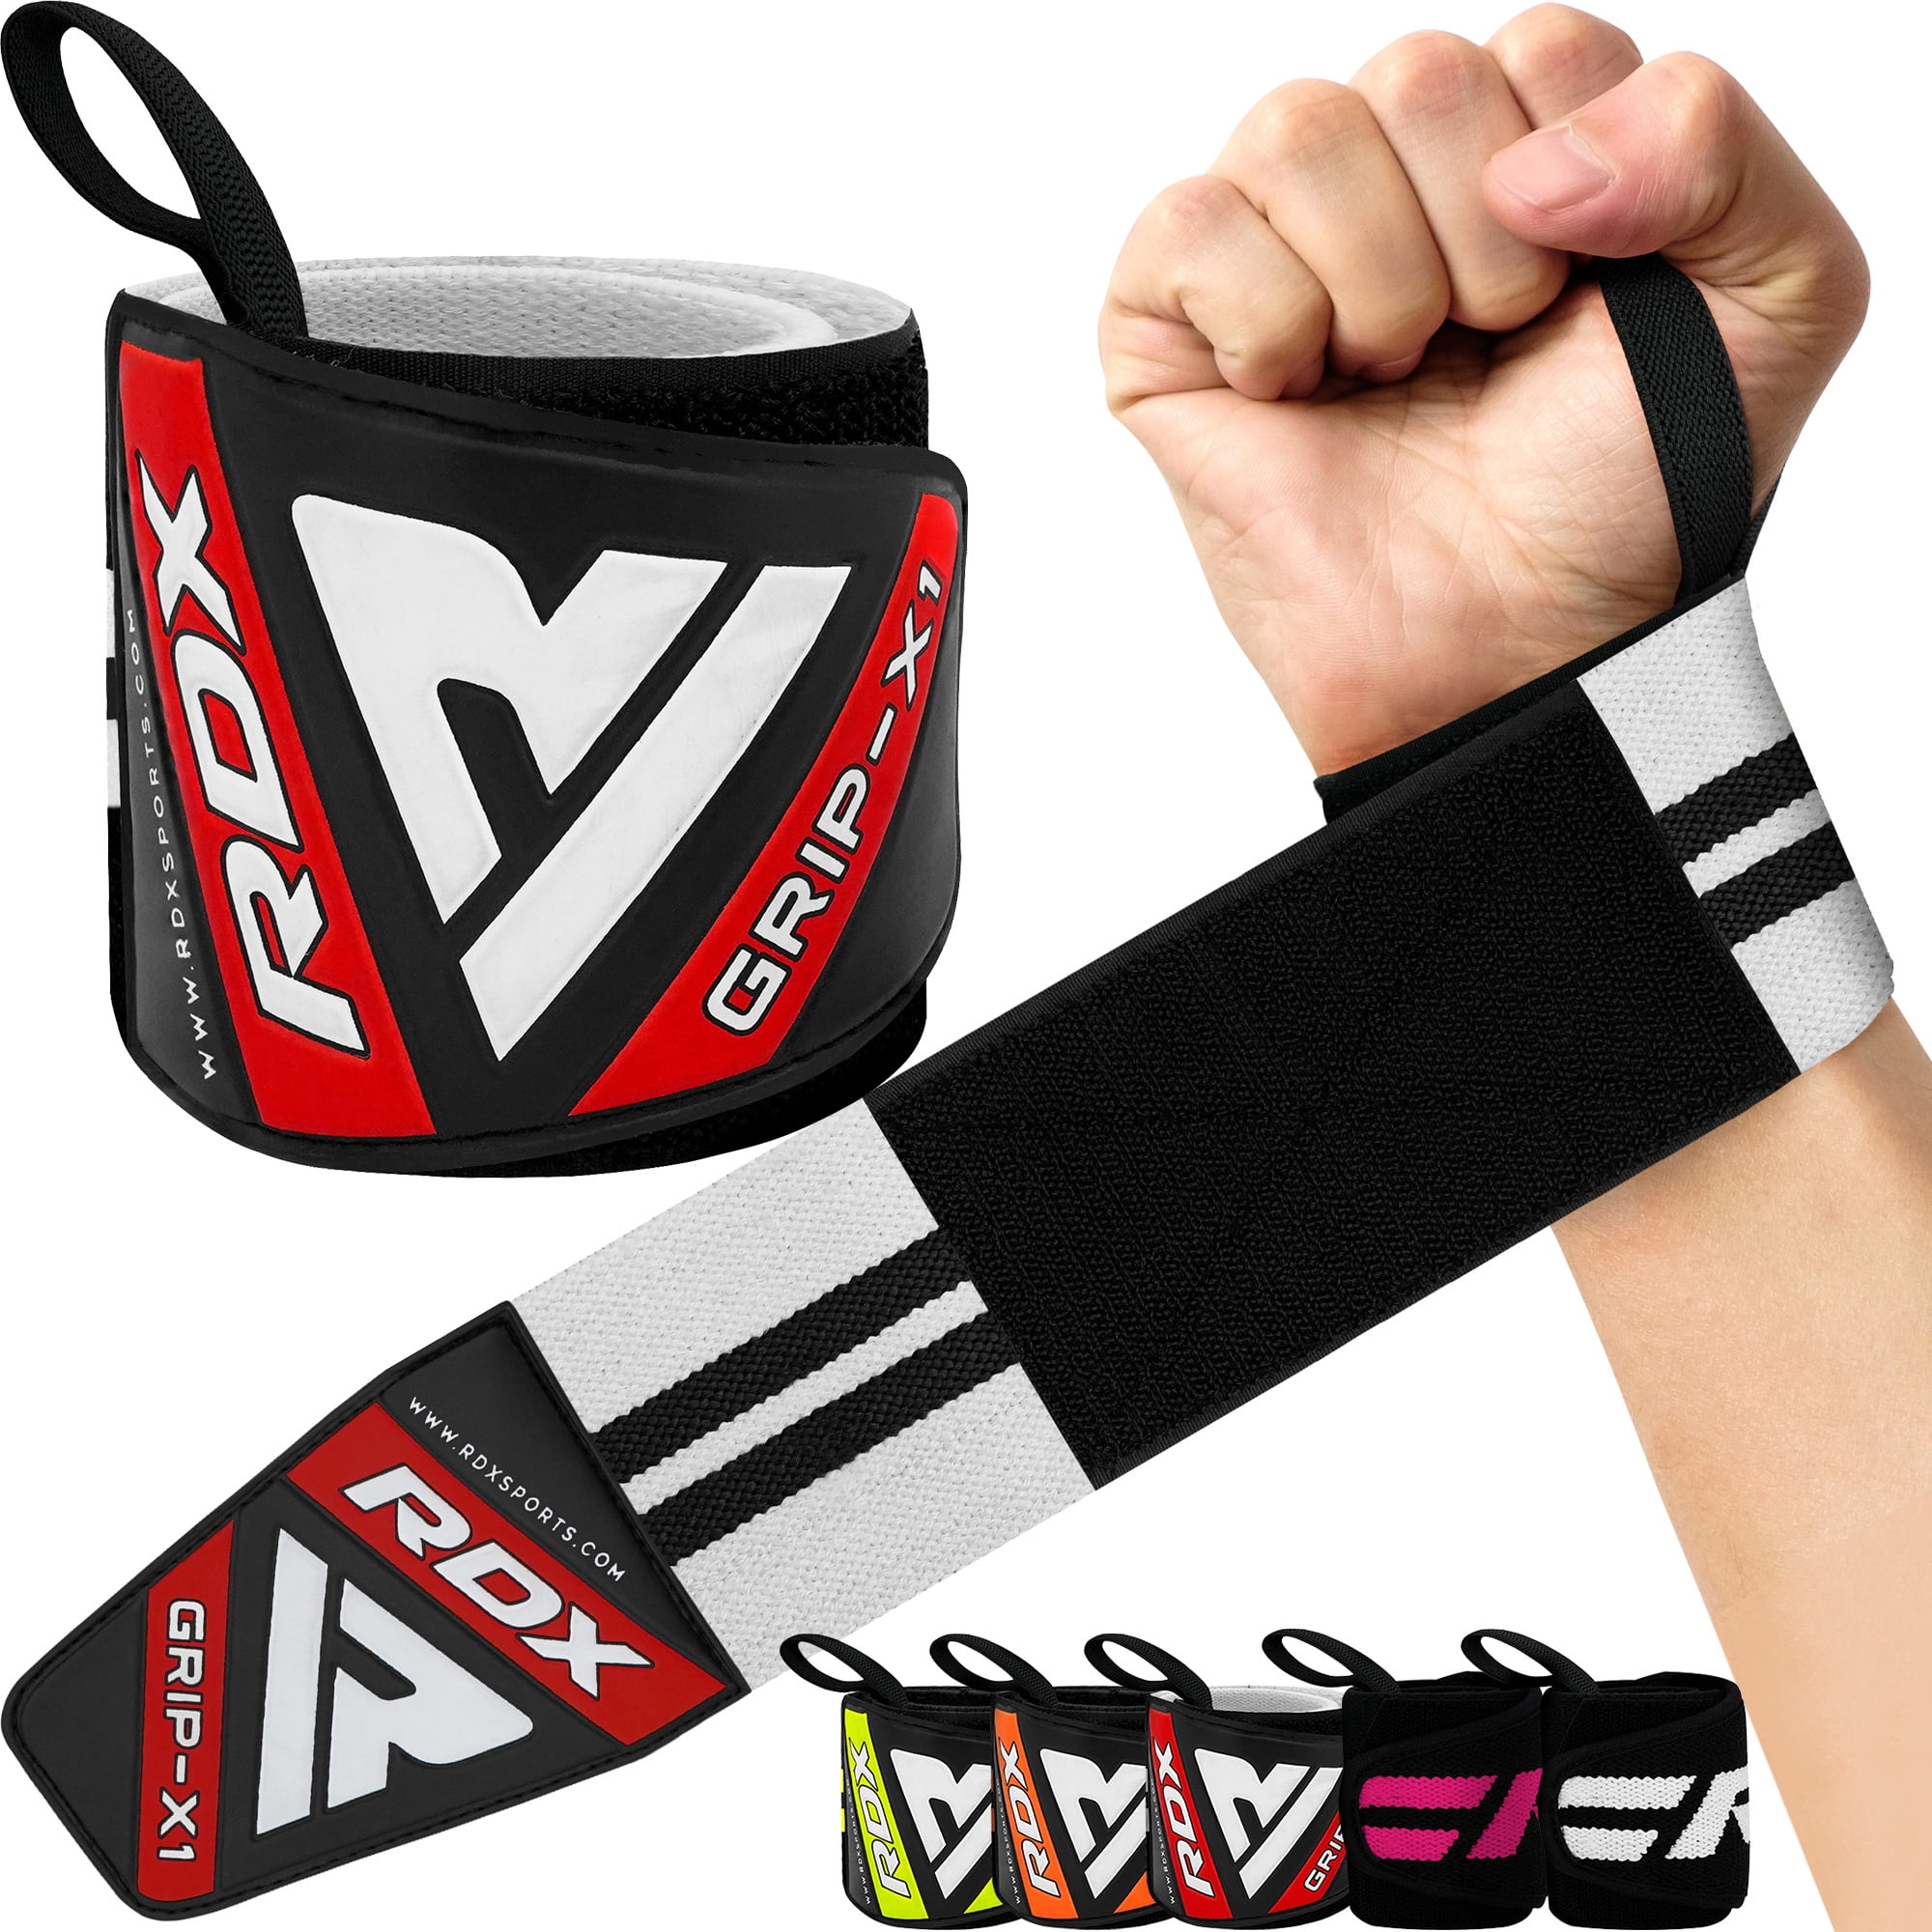 Lifting Straps by RDX, Weight Lifting, Wrist Wraps, Gym Wraps Training  Workout